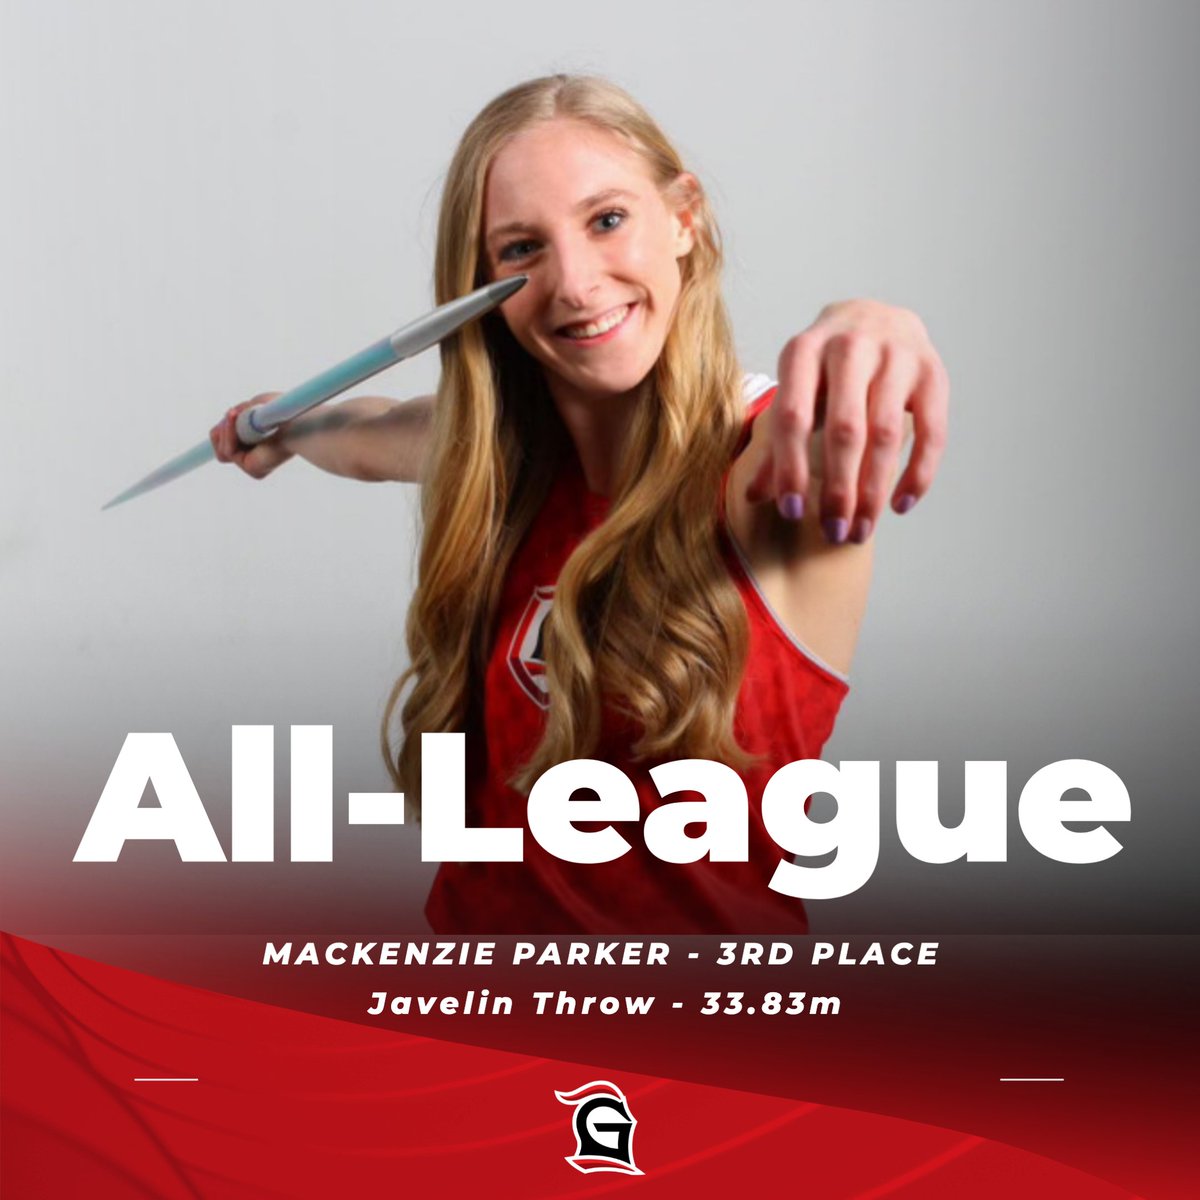 Mackenzie Parker lands herself a 3rd place finish for All-League honors in the Javelin with a heave of 33.83m!

#MakeHIMKnown #LancerUp #AllLeague